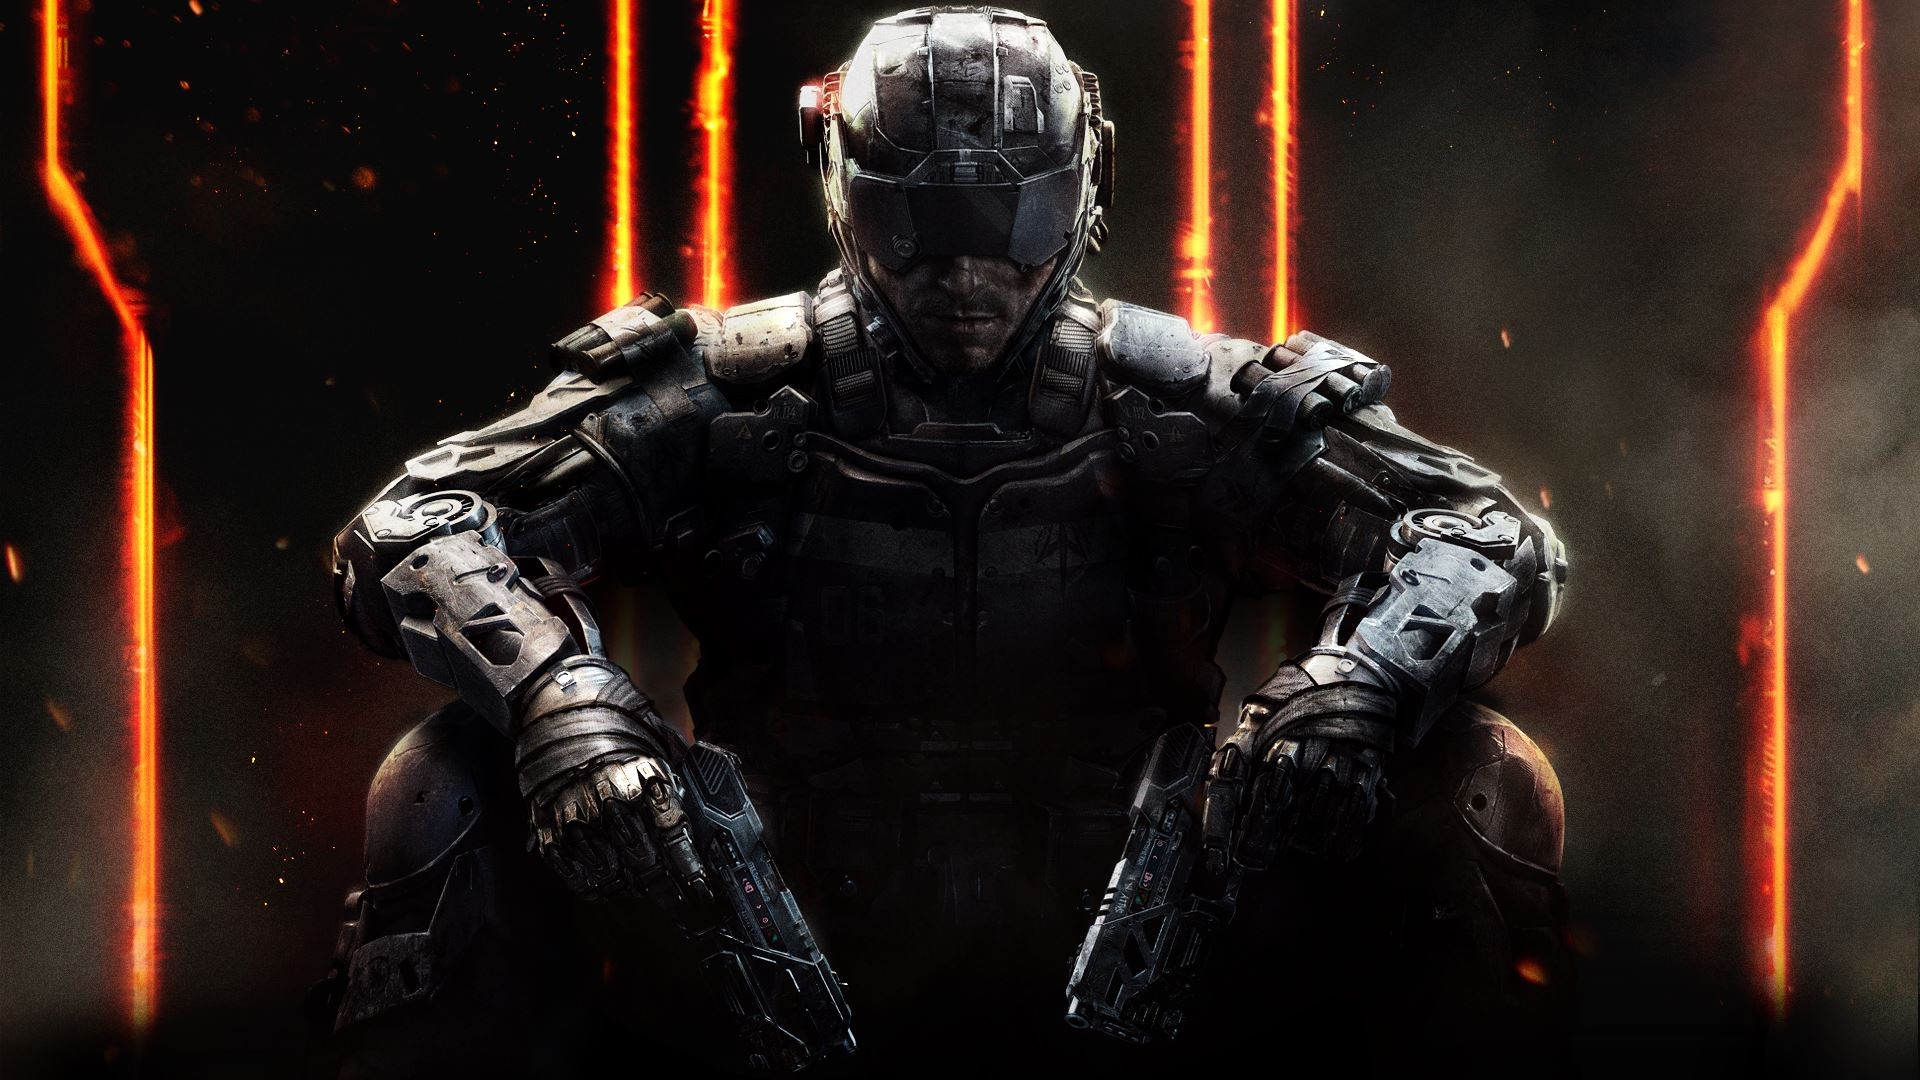 call of duty: black ops iii, call of duty, video game